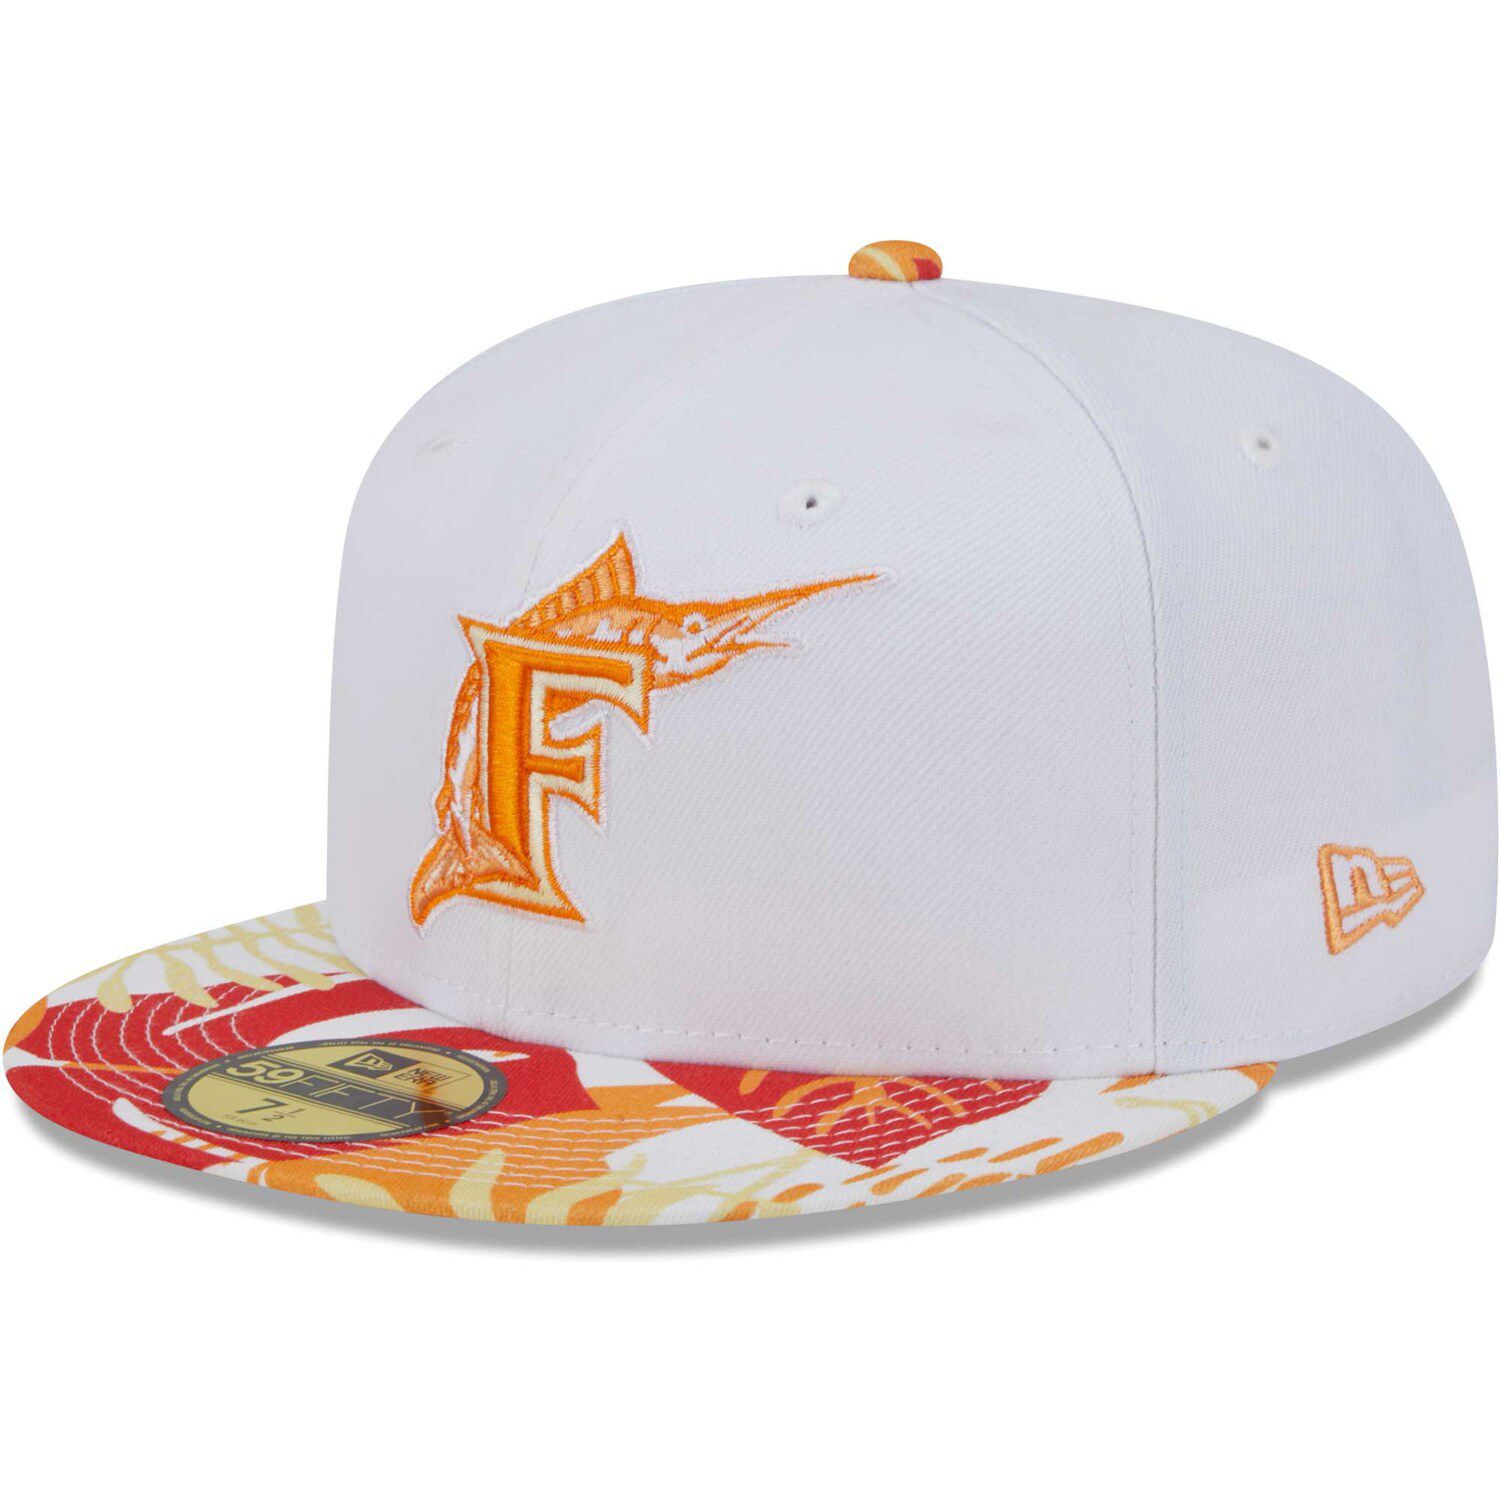 Florida Marlins Mitchell & Ness Cooperstown Collection Pro Crown